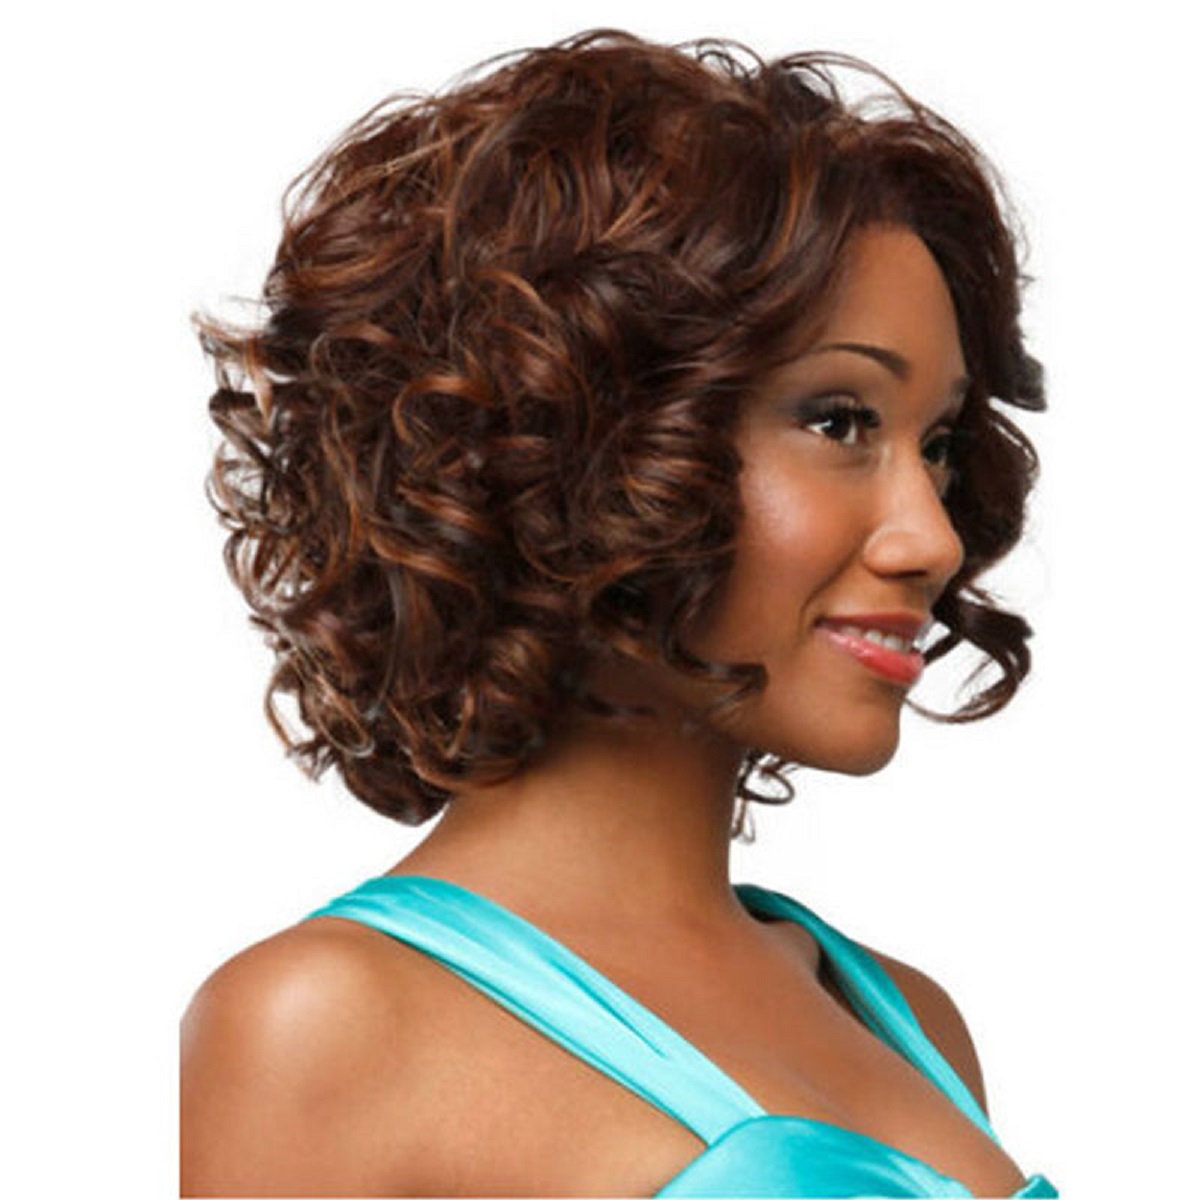 US Women Short Black Curly Wigs For Women African Lady Afro Full Curly